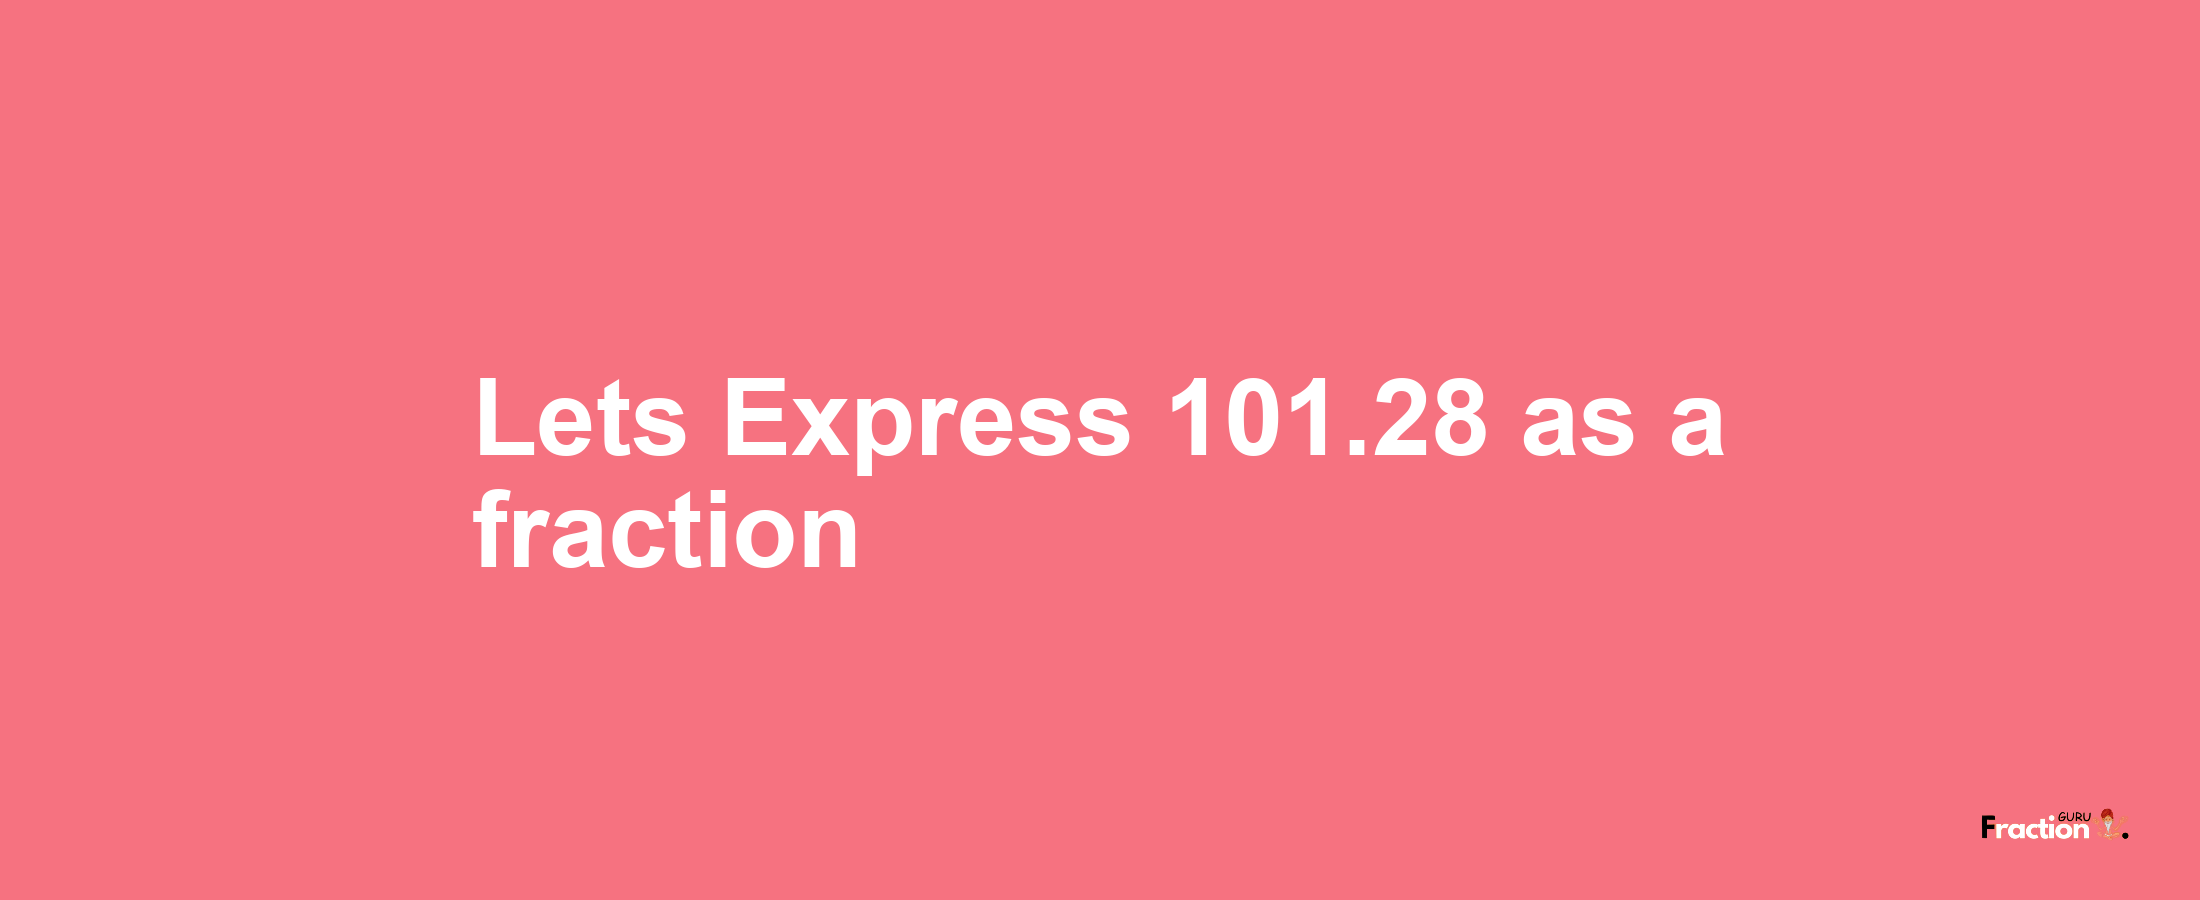 Lets Express 101.28 as afraction